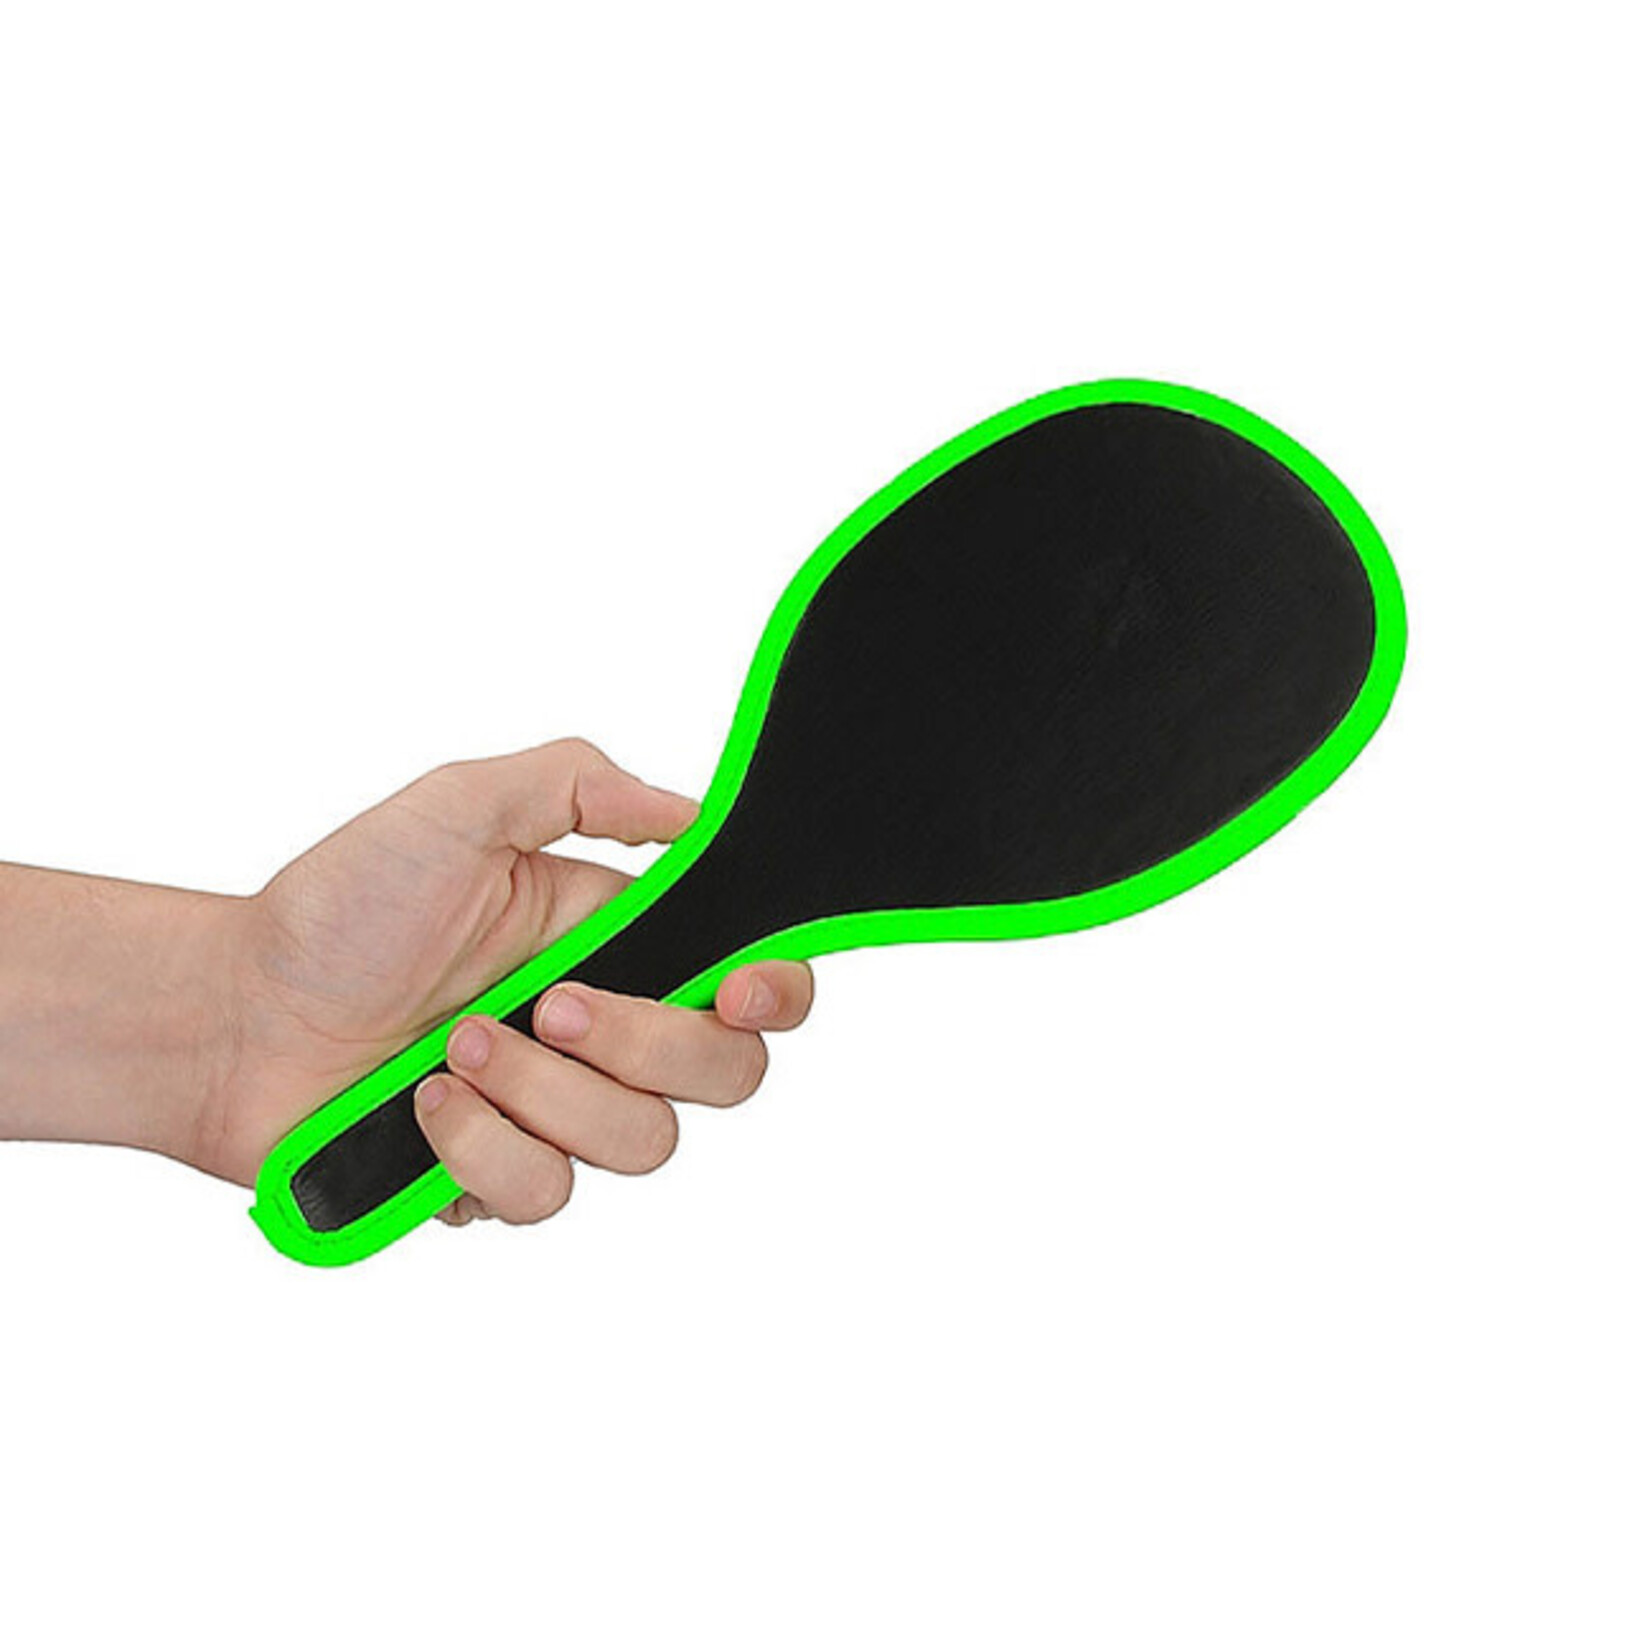 Shots America Ouch! Glow in the Dark Round Paddle